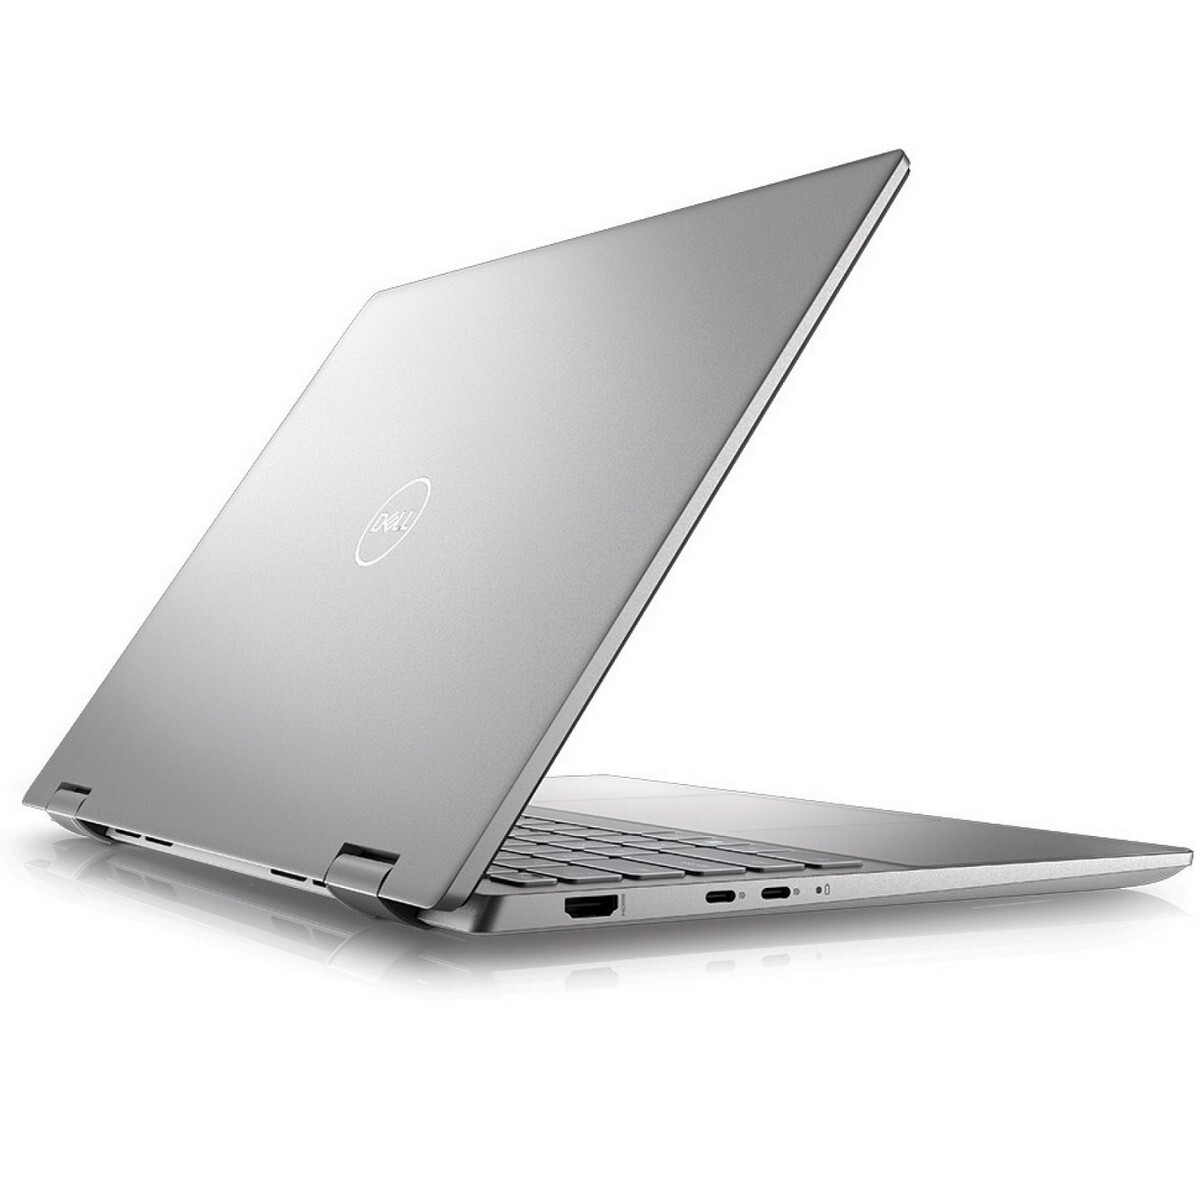 DELL Inspiron Core i3 12th Gen 8 GB/512 GB SSD/Windows 11 Home  Inspiron 7420 Thin and Light Laptop